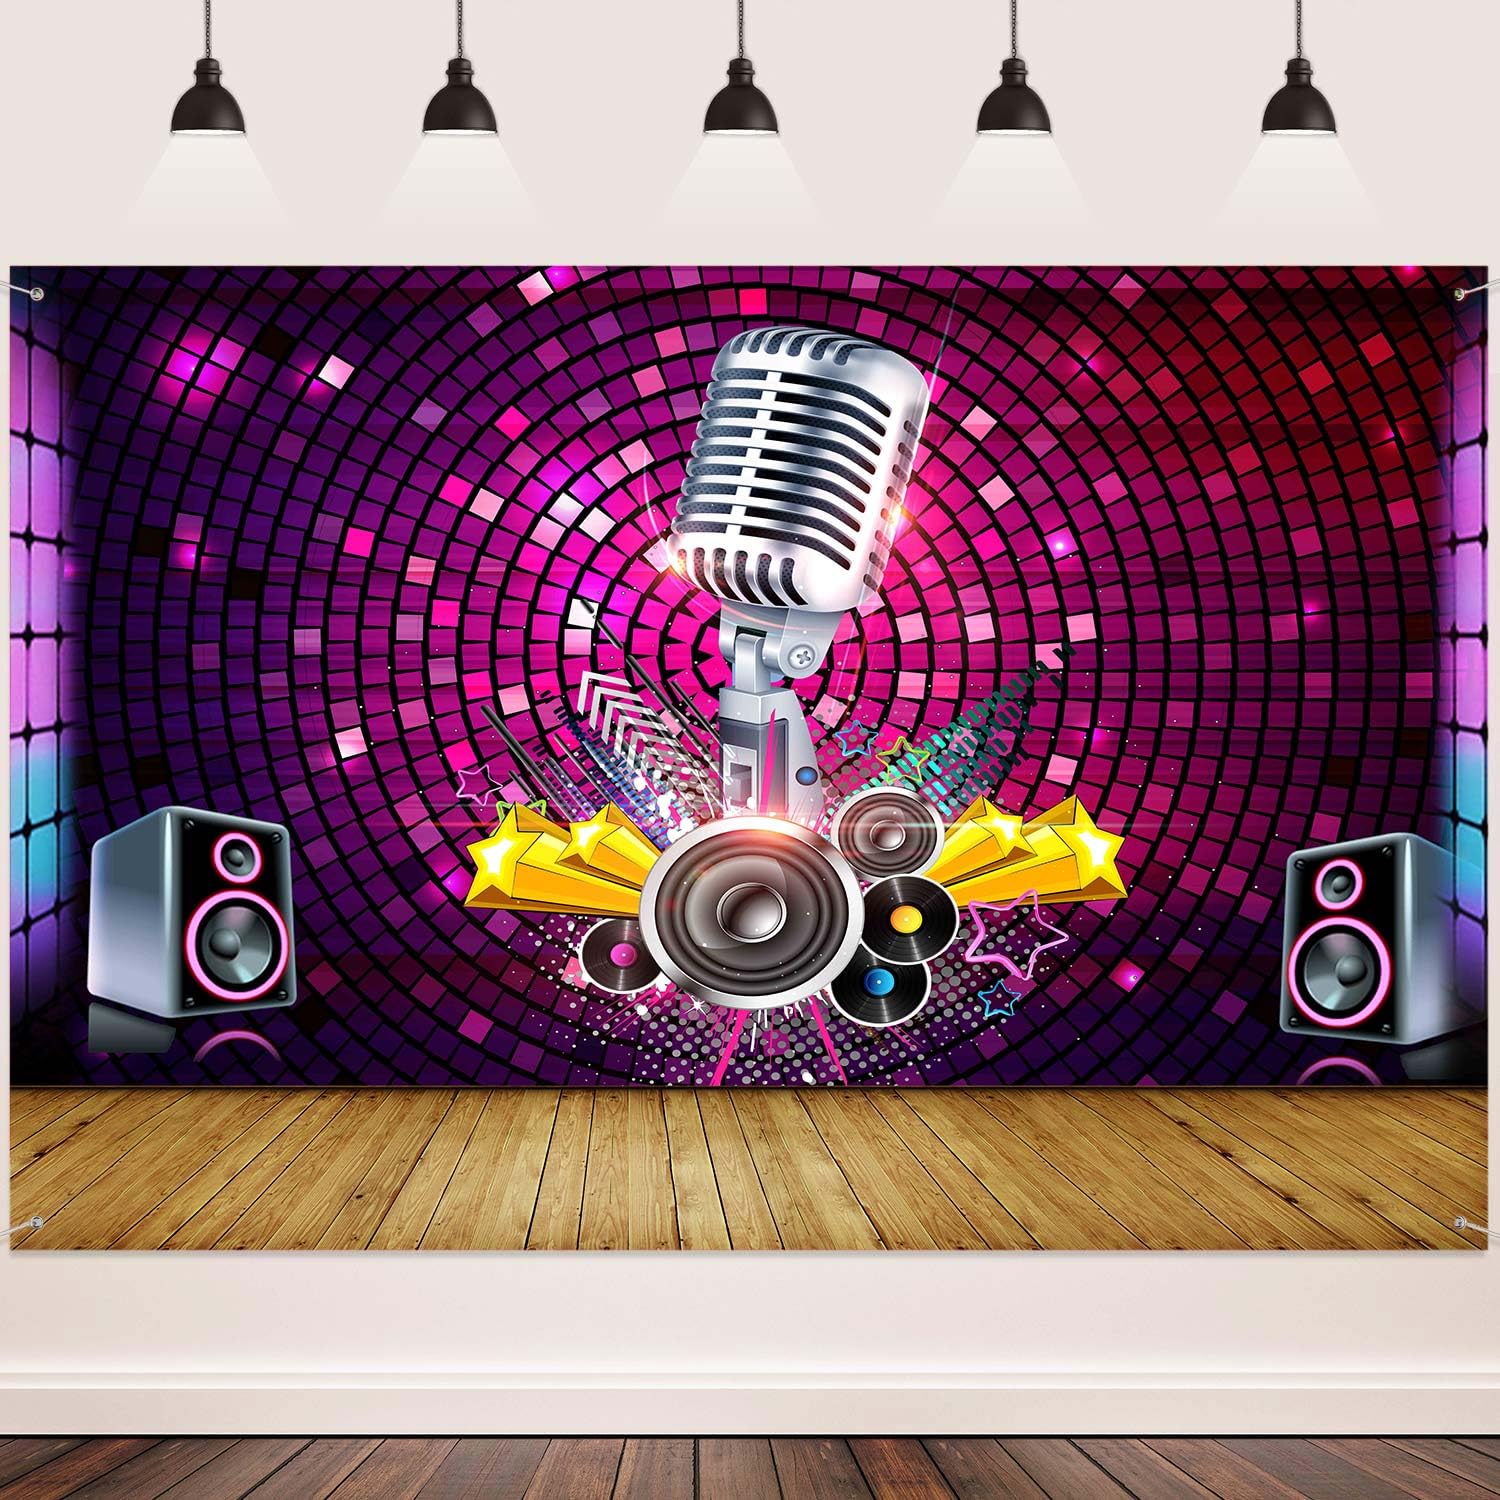 MEETSIOY 10x7ft Karaoke Photography Backdrop Wood Floor Microphone Sound Background Themed Party Photo Booth Backdrop BJMYMT112